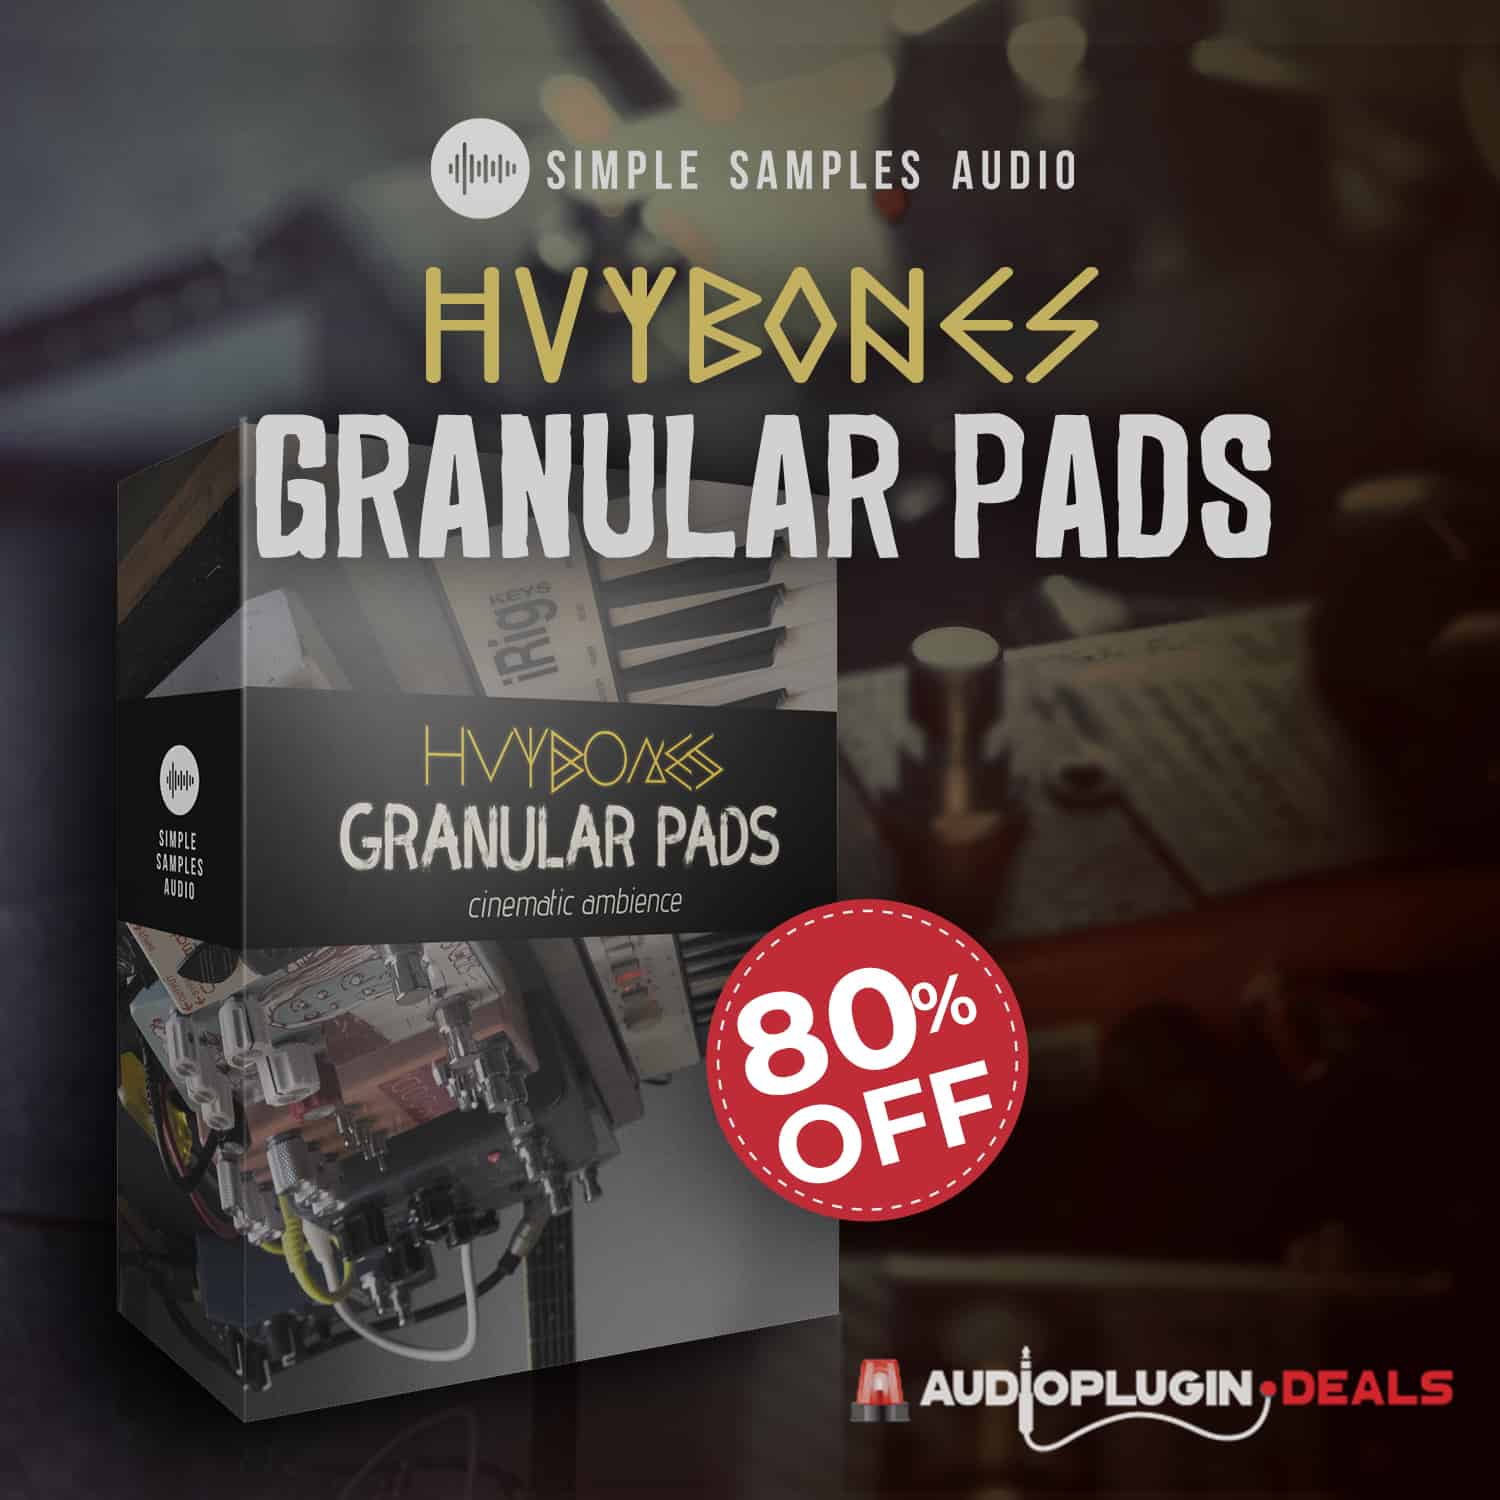 OUT NOW – HVYBONES Granular Pads by Simple Samples Audio – 80% OFF!